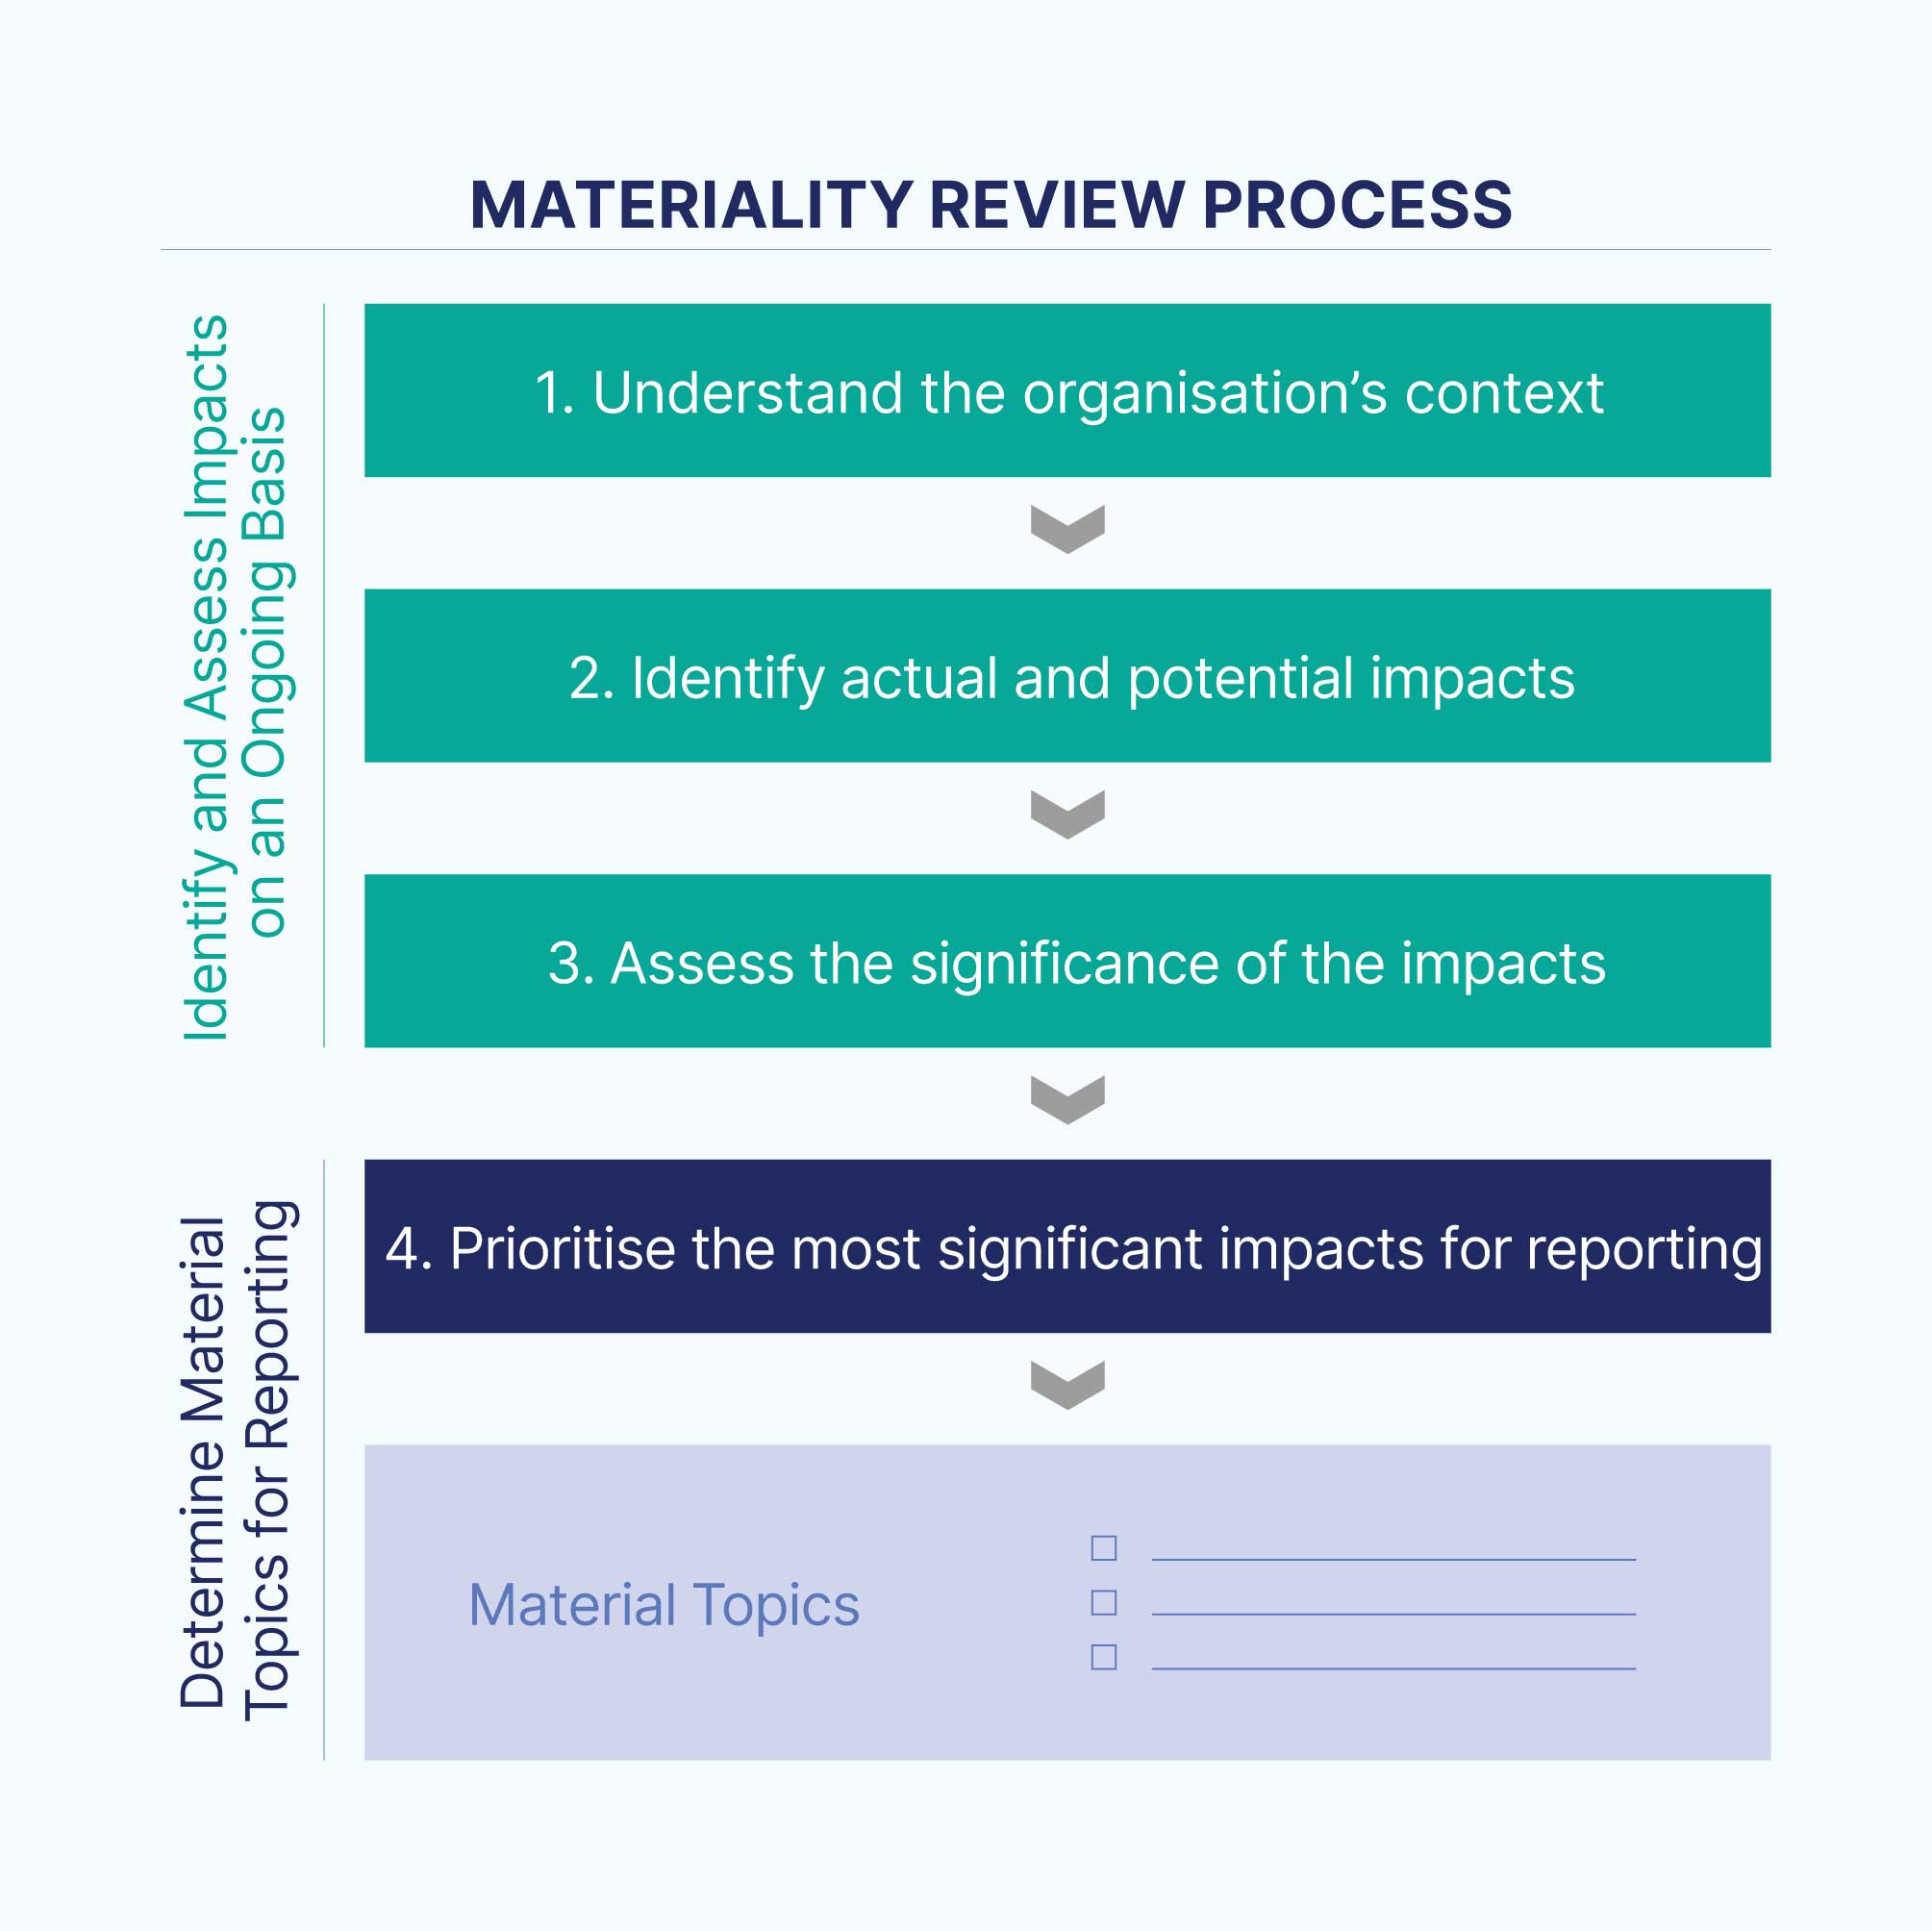 ST Engineering MATERIALITY REVIEW PROCESS